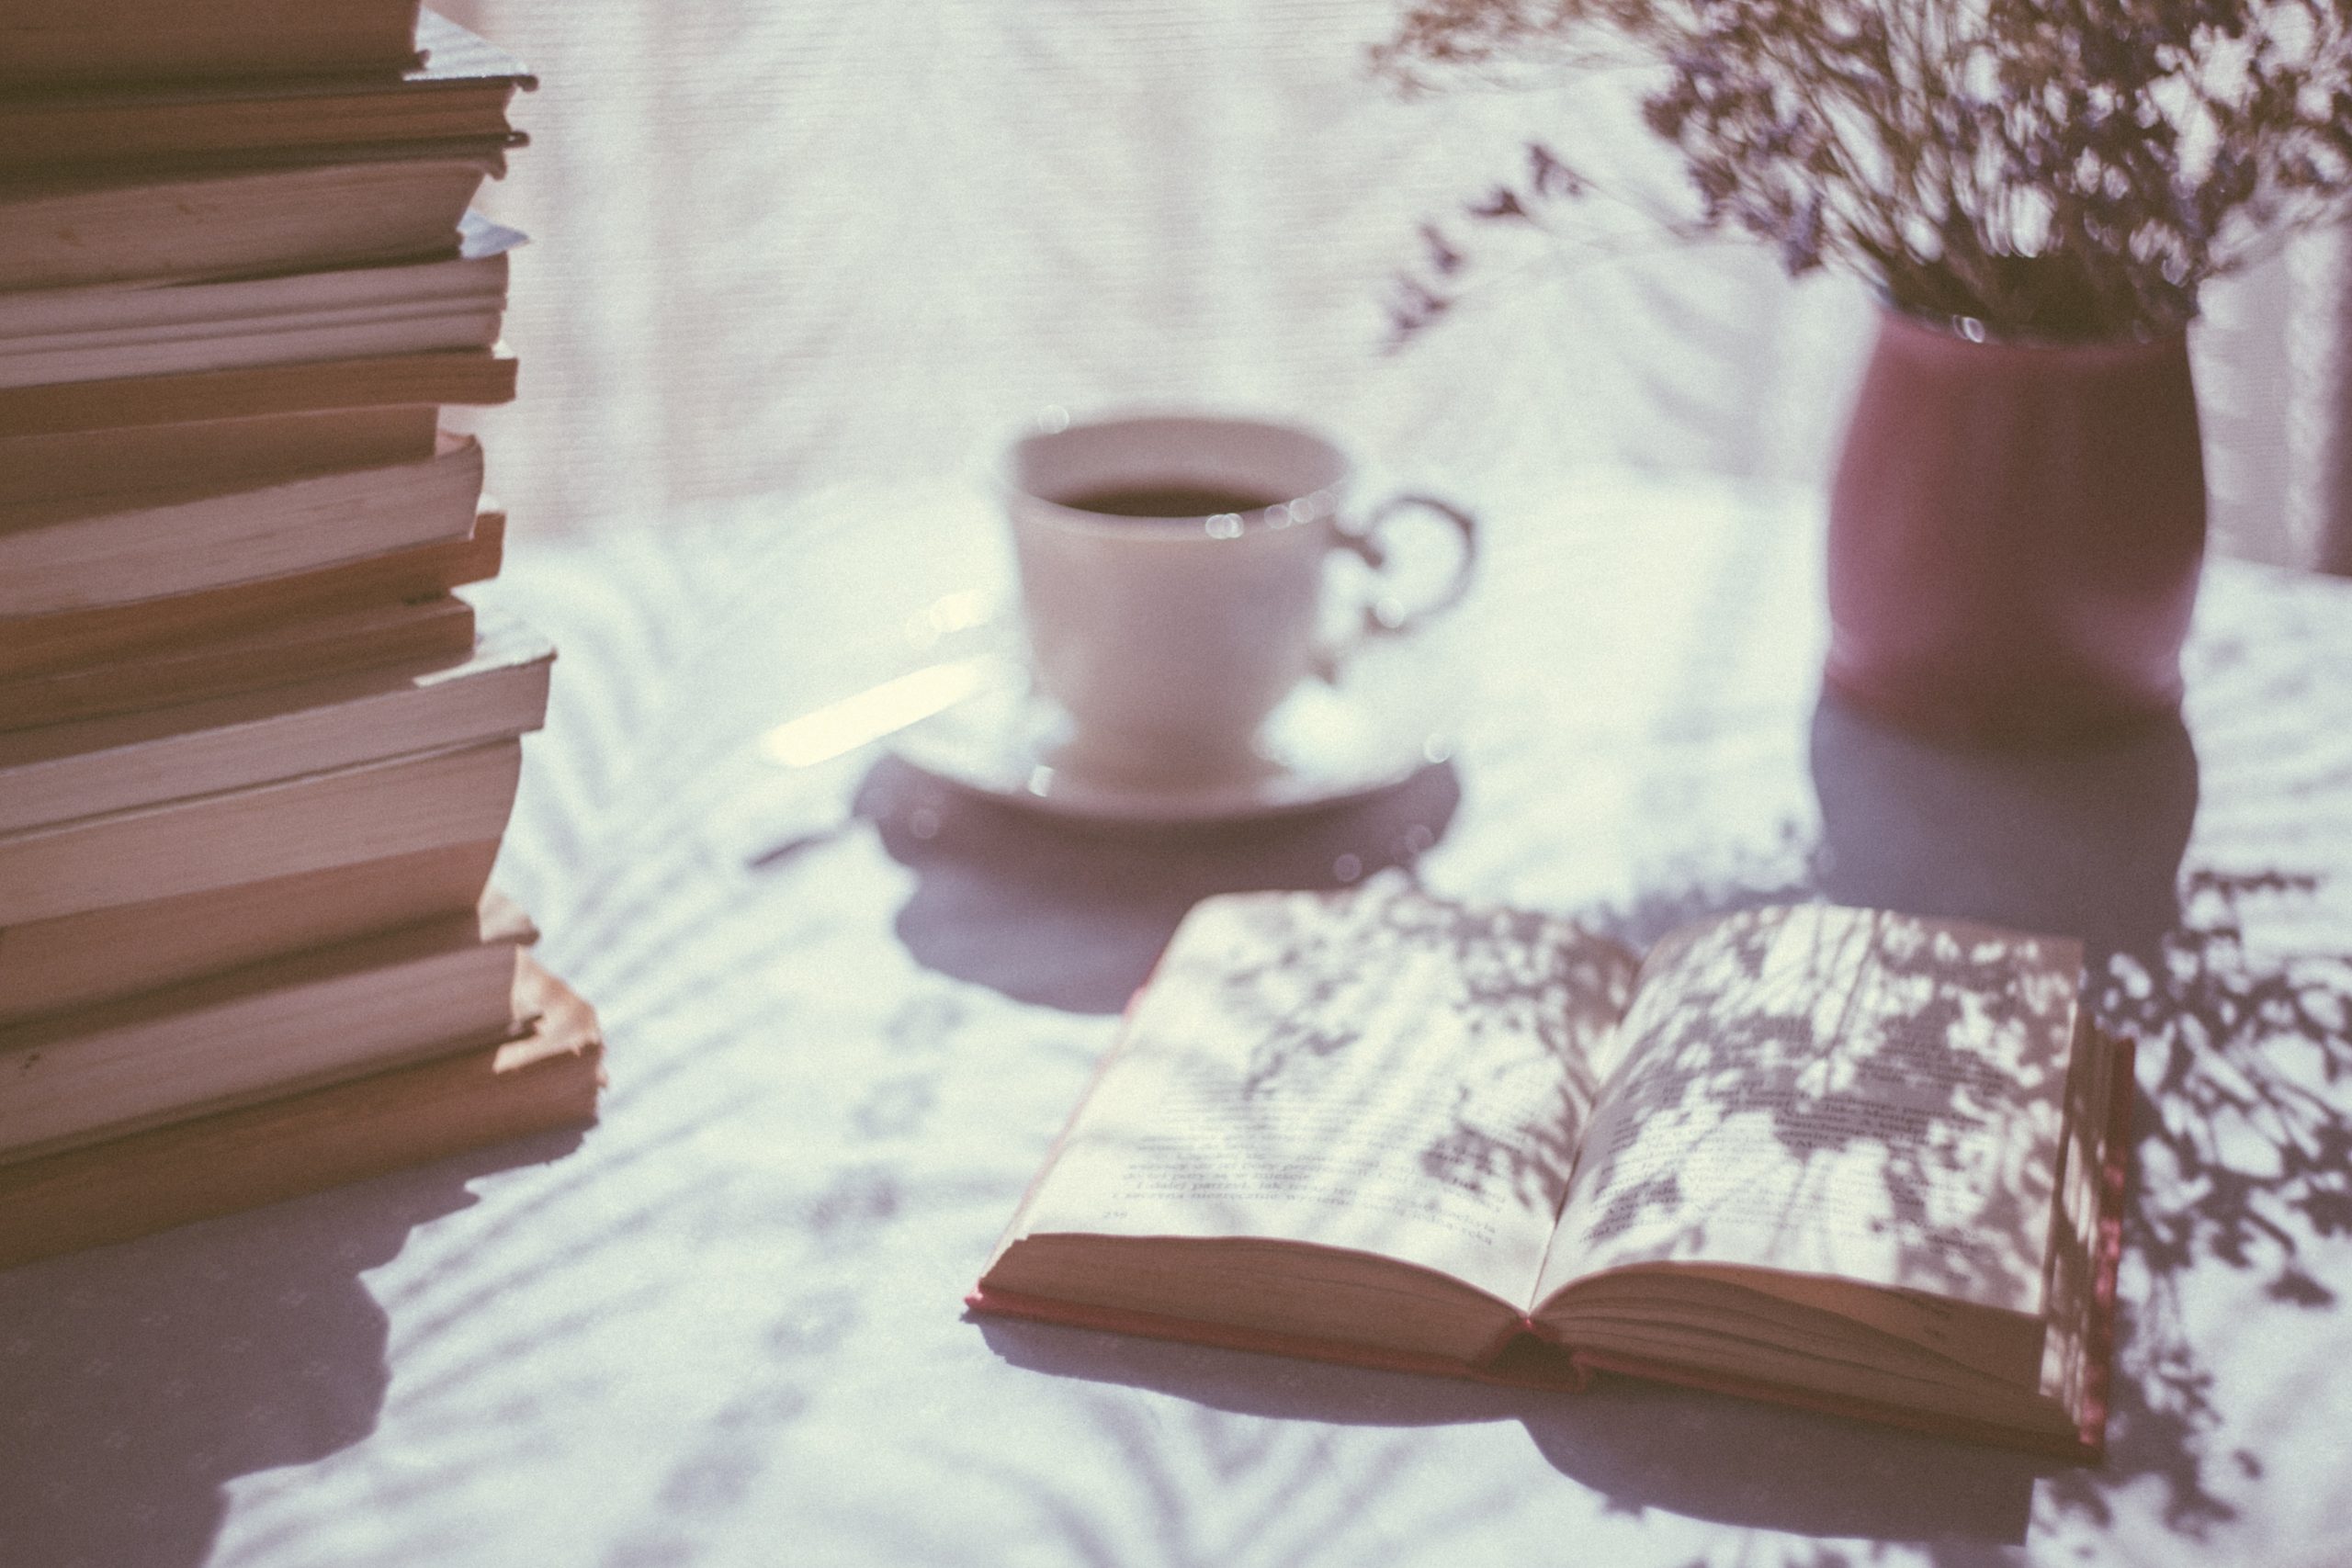 image of an open book and cup on a table